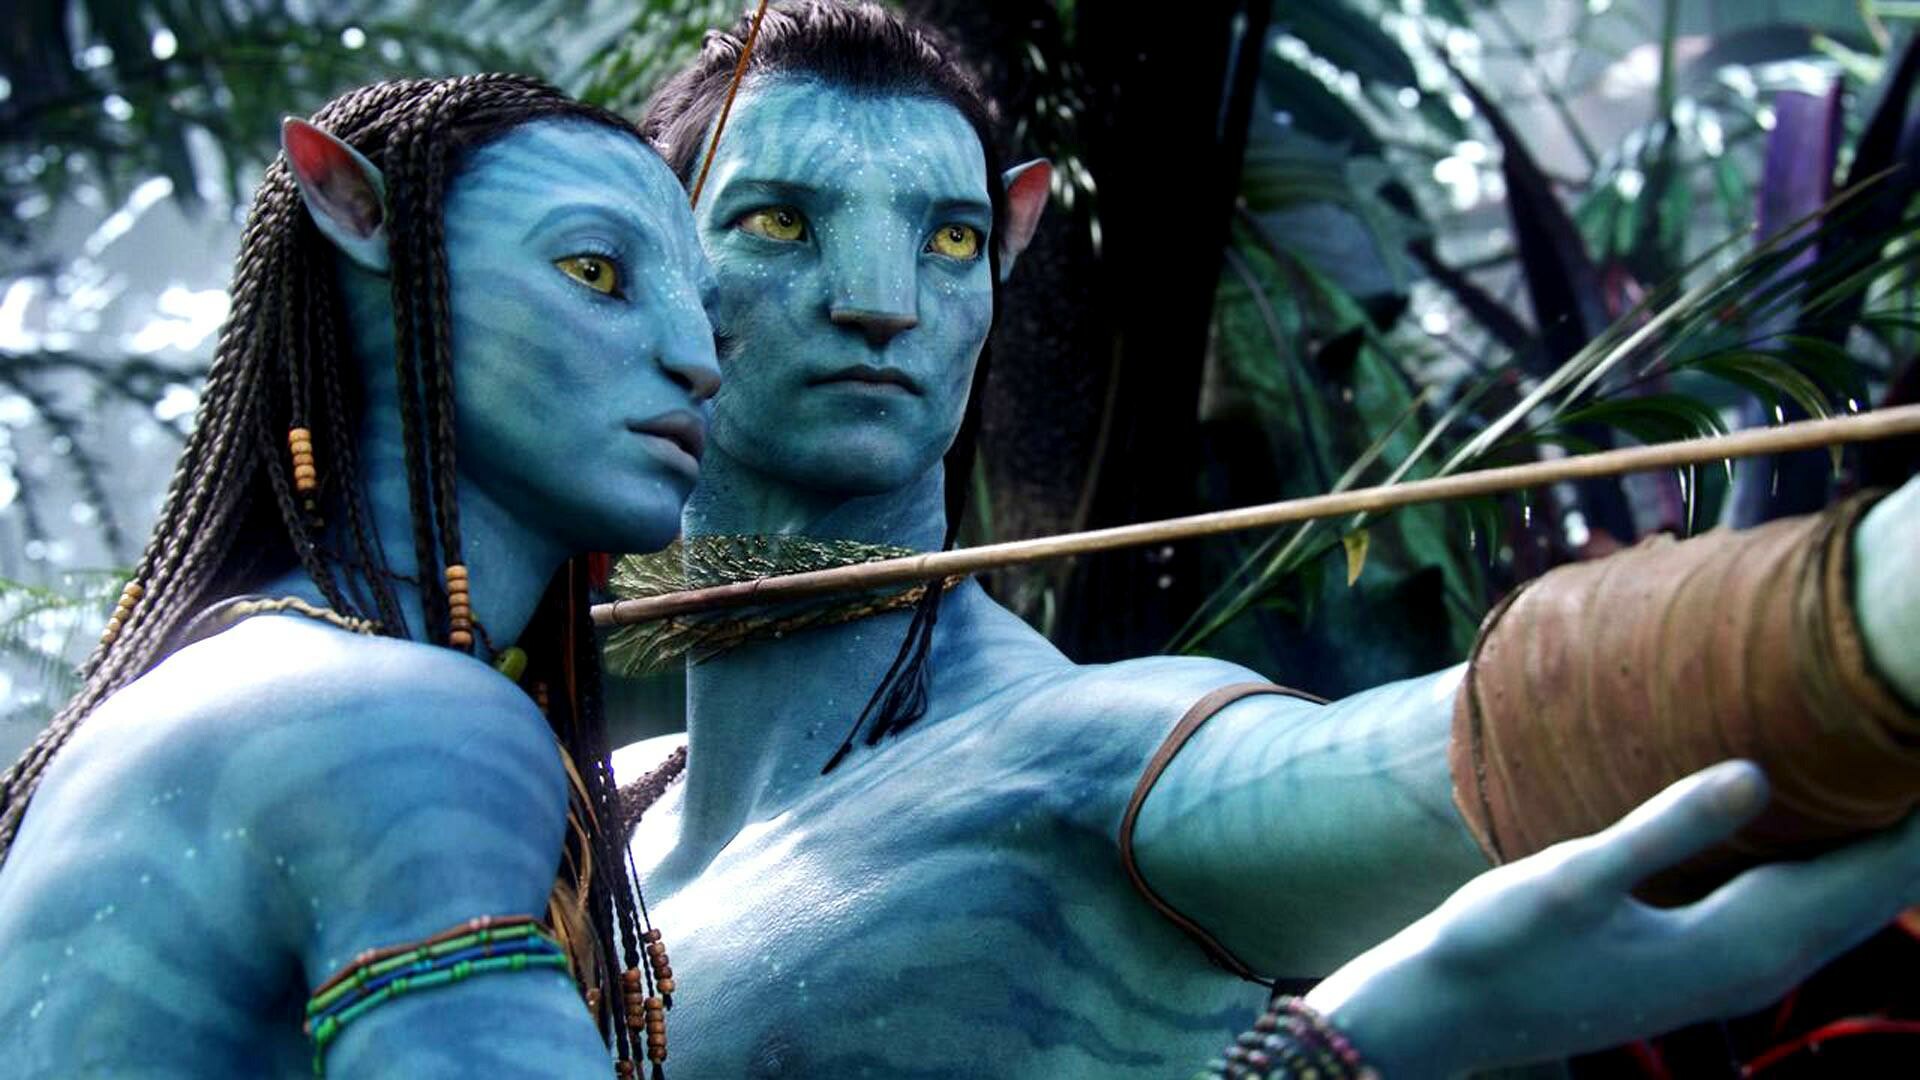 Avatar: Neytiri fights alongside Jake in the Assault on the Tree of Souls and saves him from being killed by Miles Quaritch. 1920x1080 Full HD Background.